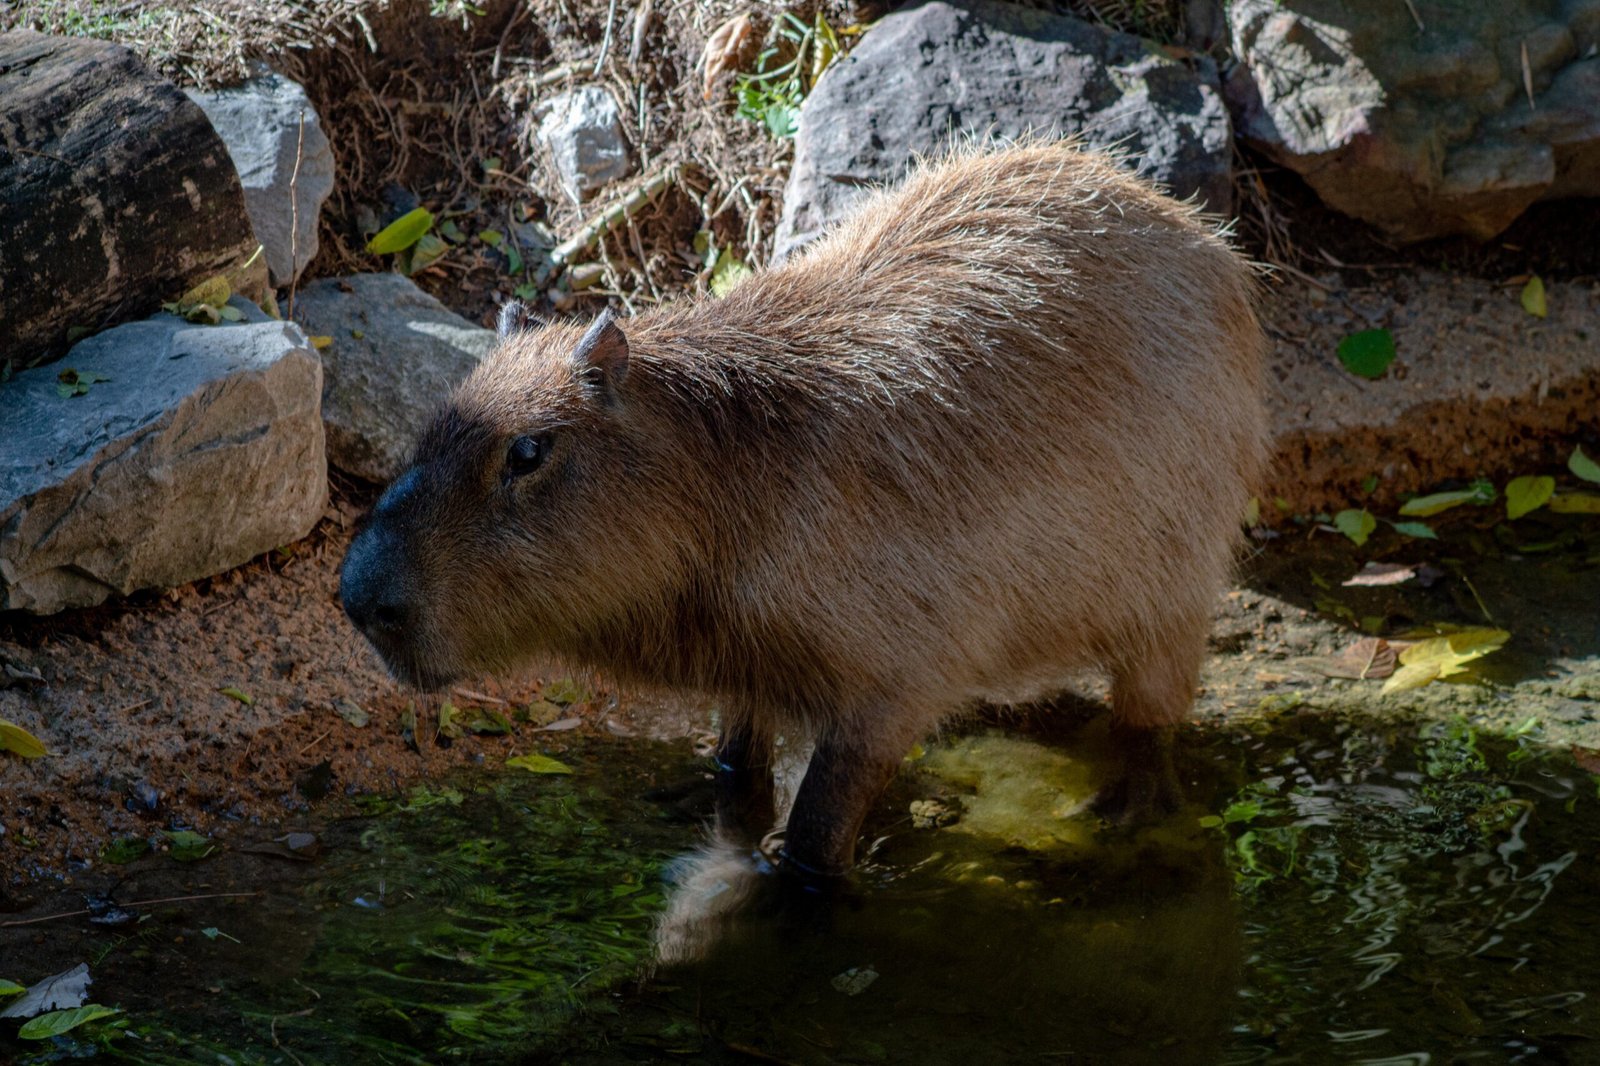 Giant Guinea Pig: Another Name for Capybara